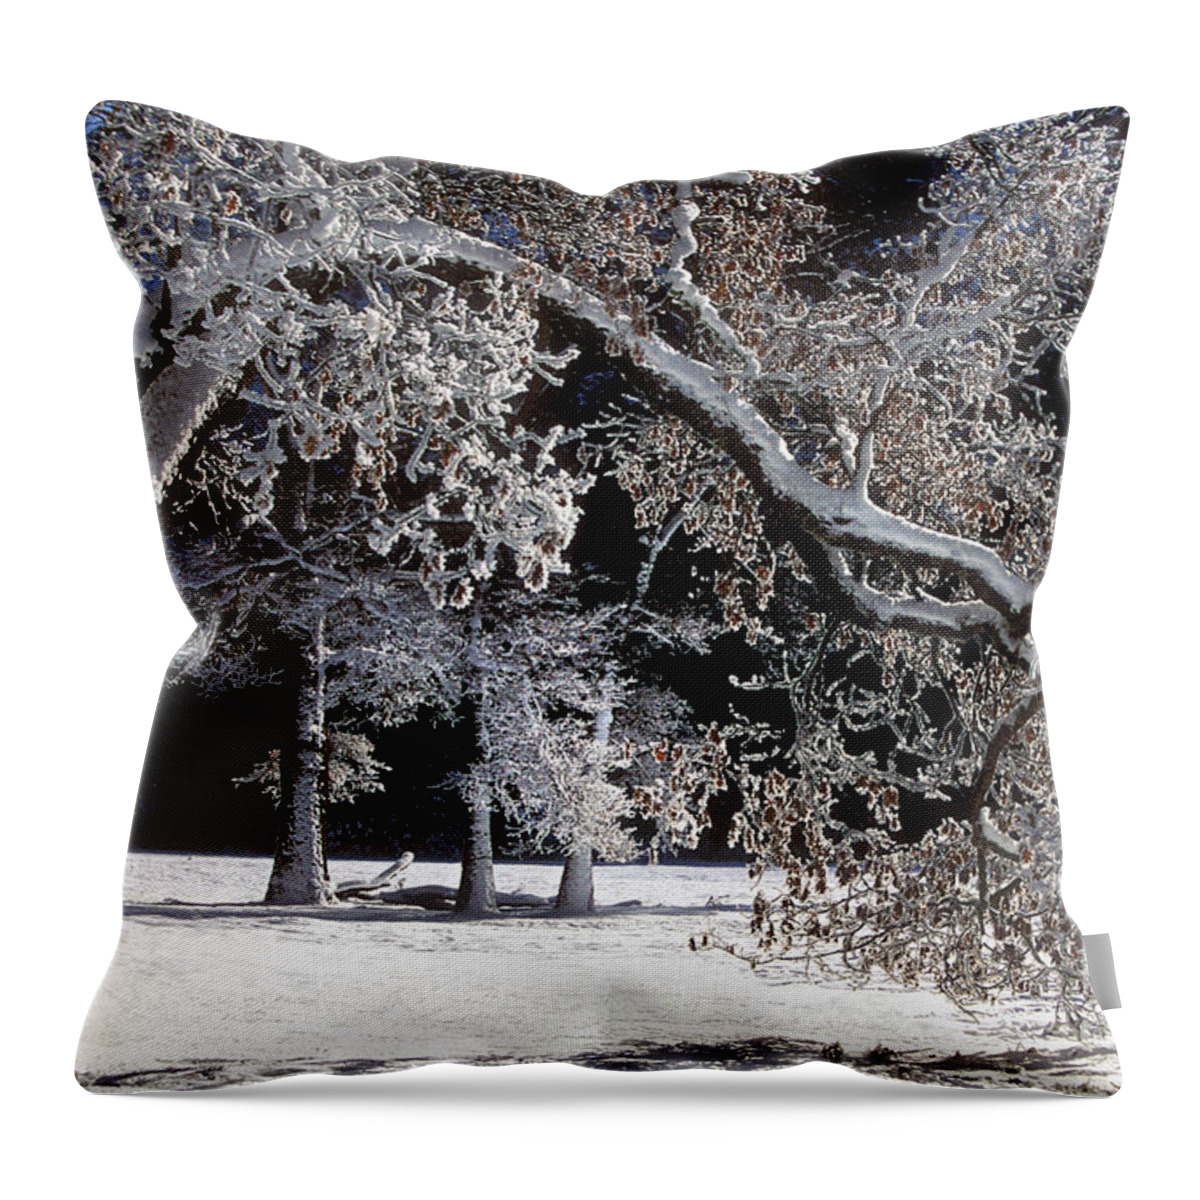 Black Oak Throw Pillow featuring the photograph Snow Covered Black Oak Yosemite National Park by Dave Welling